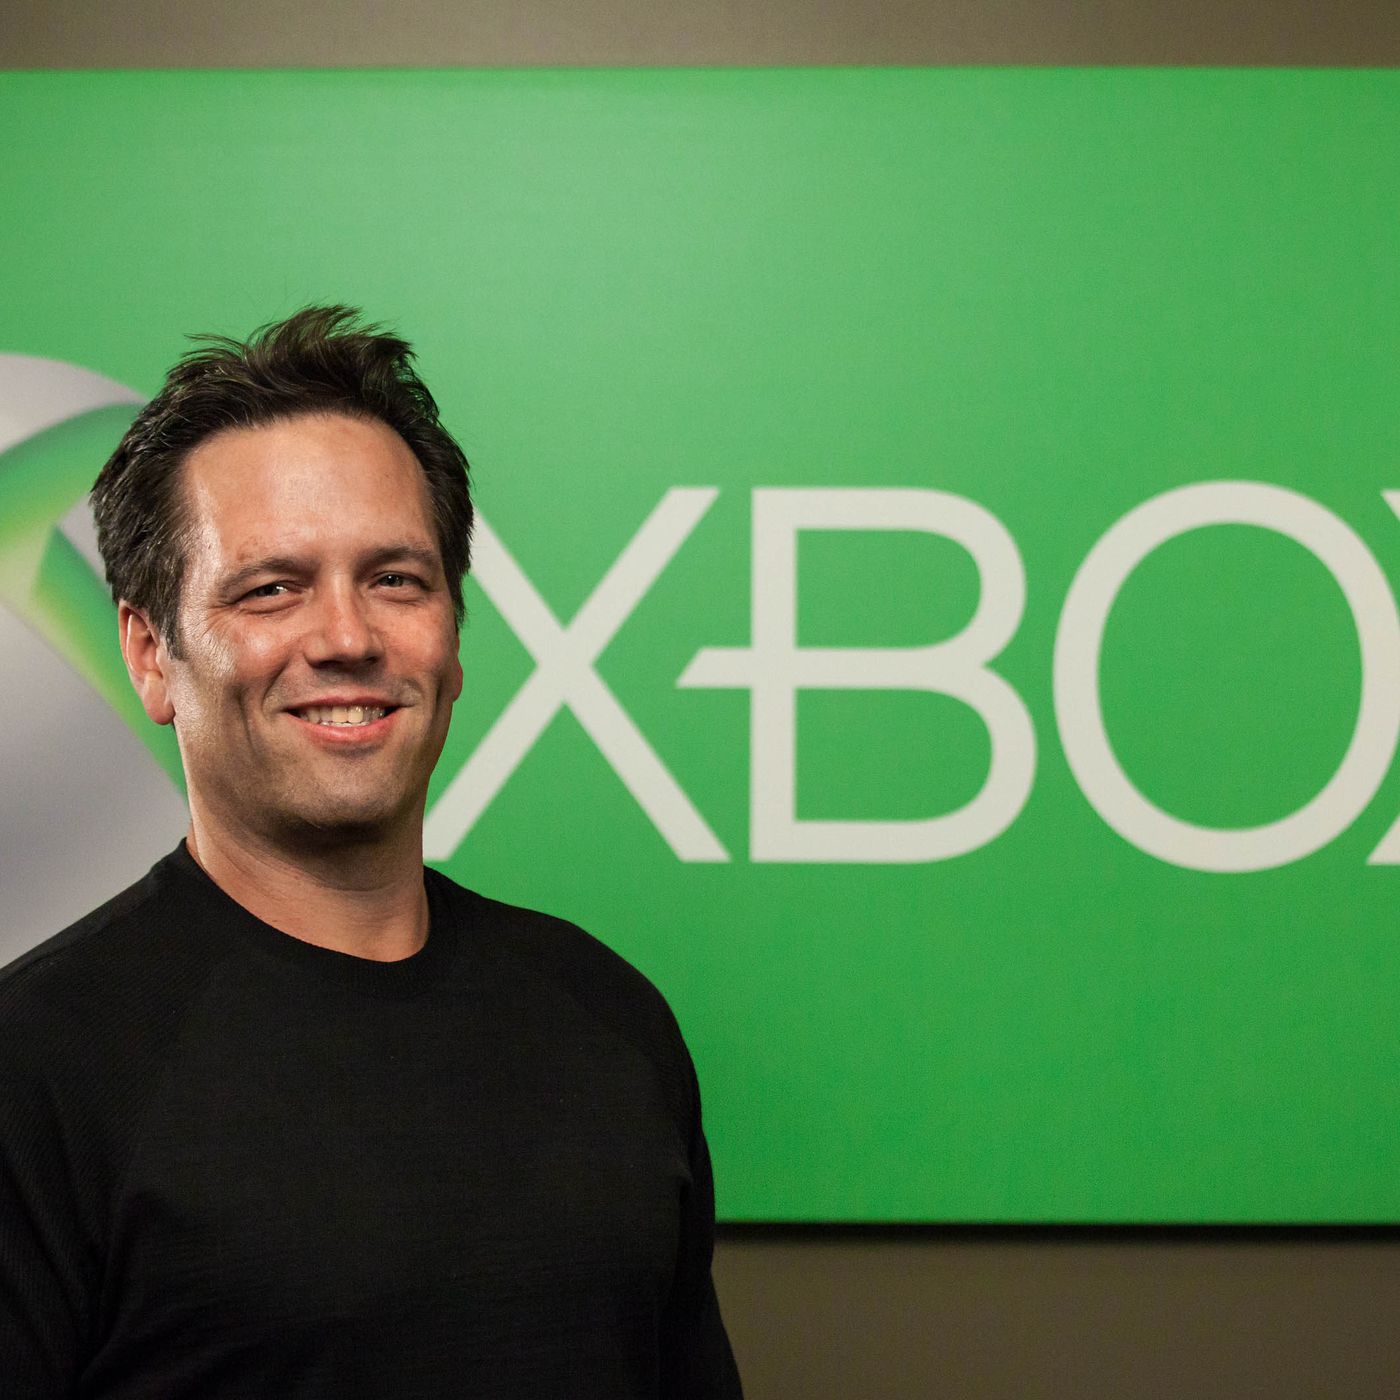 Read Microsoft Gaming CEO's email to staff about the Activision